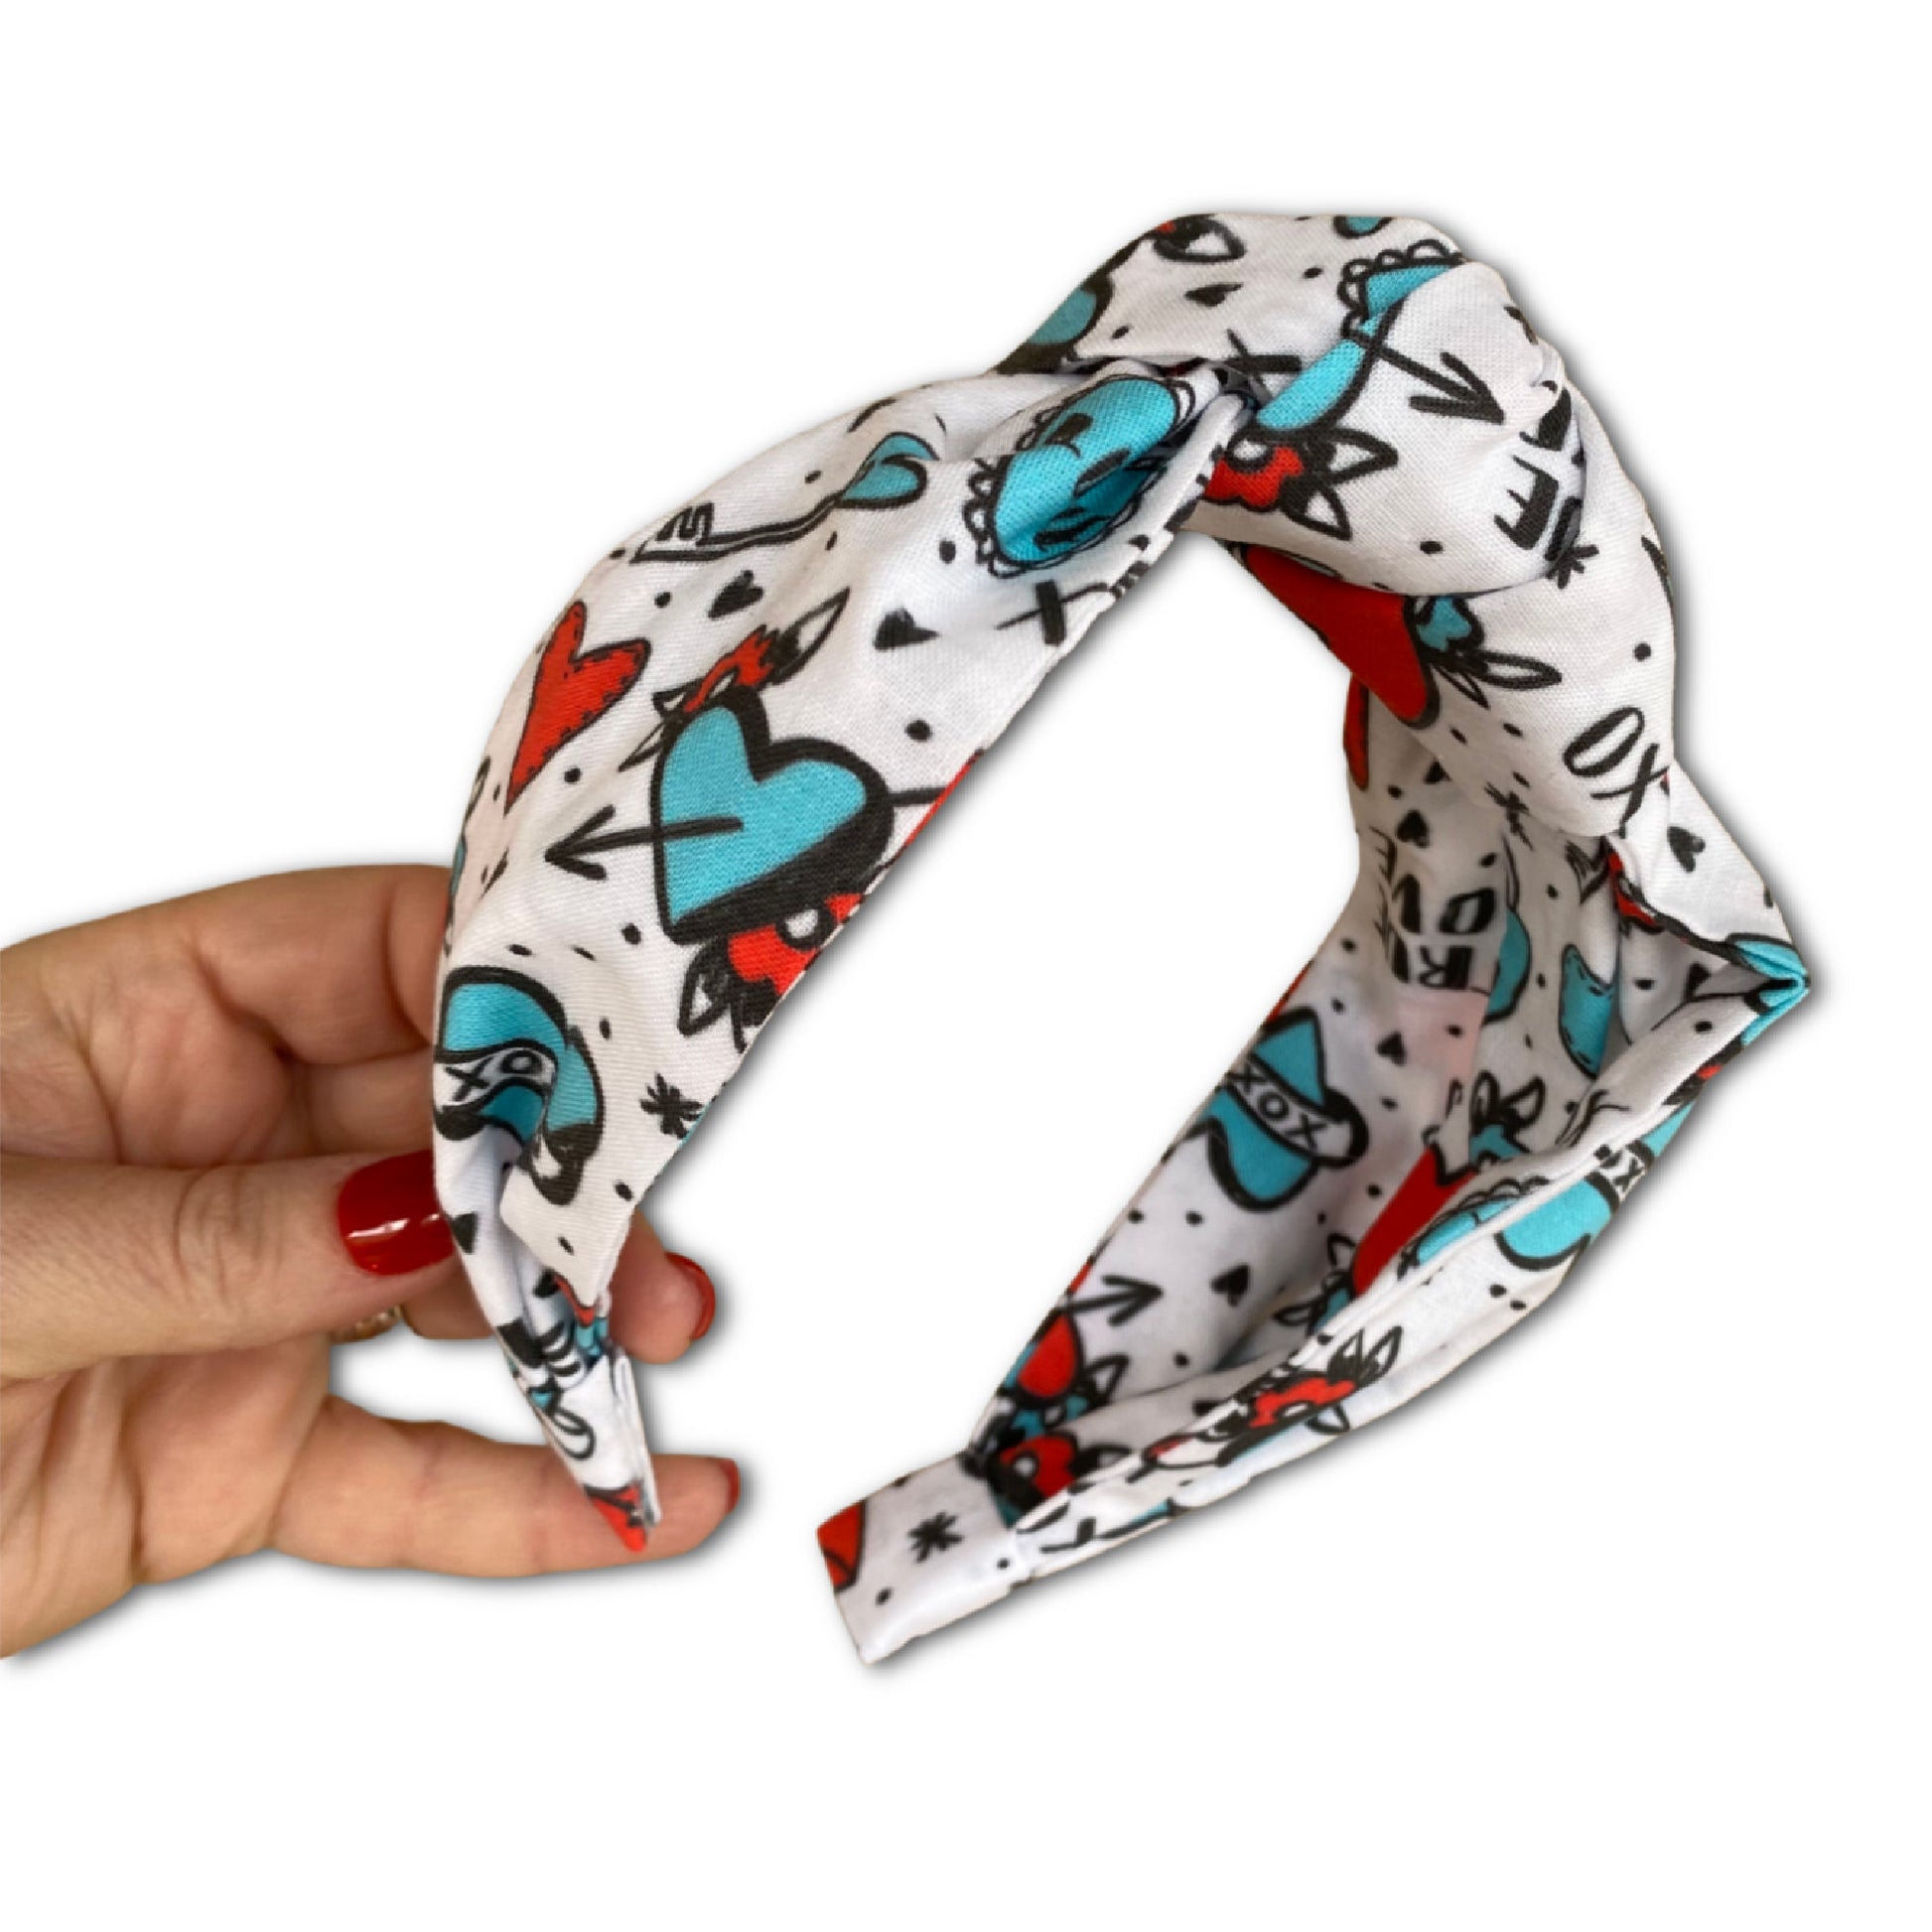 This is a headband with a knot at top. Fabric is a tattoo print with hearts, keys and locks.  Red and Turquoise colors and a white background.